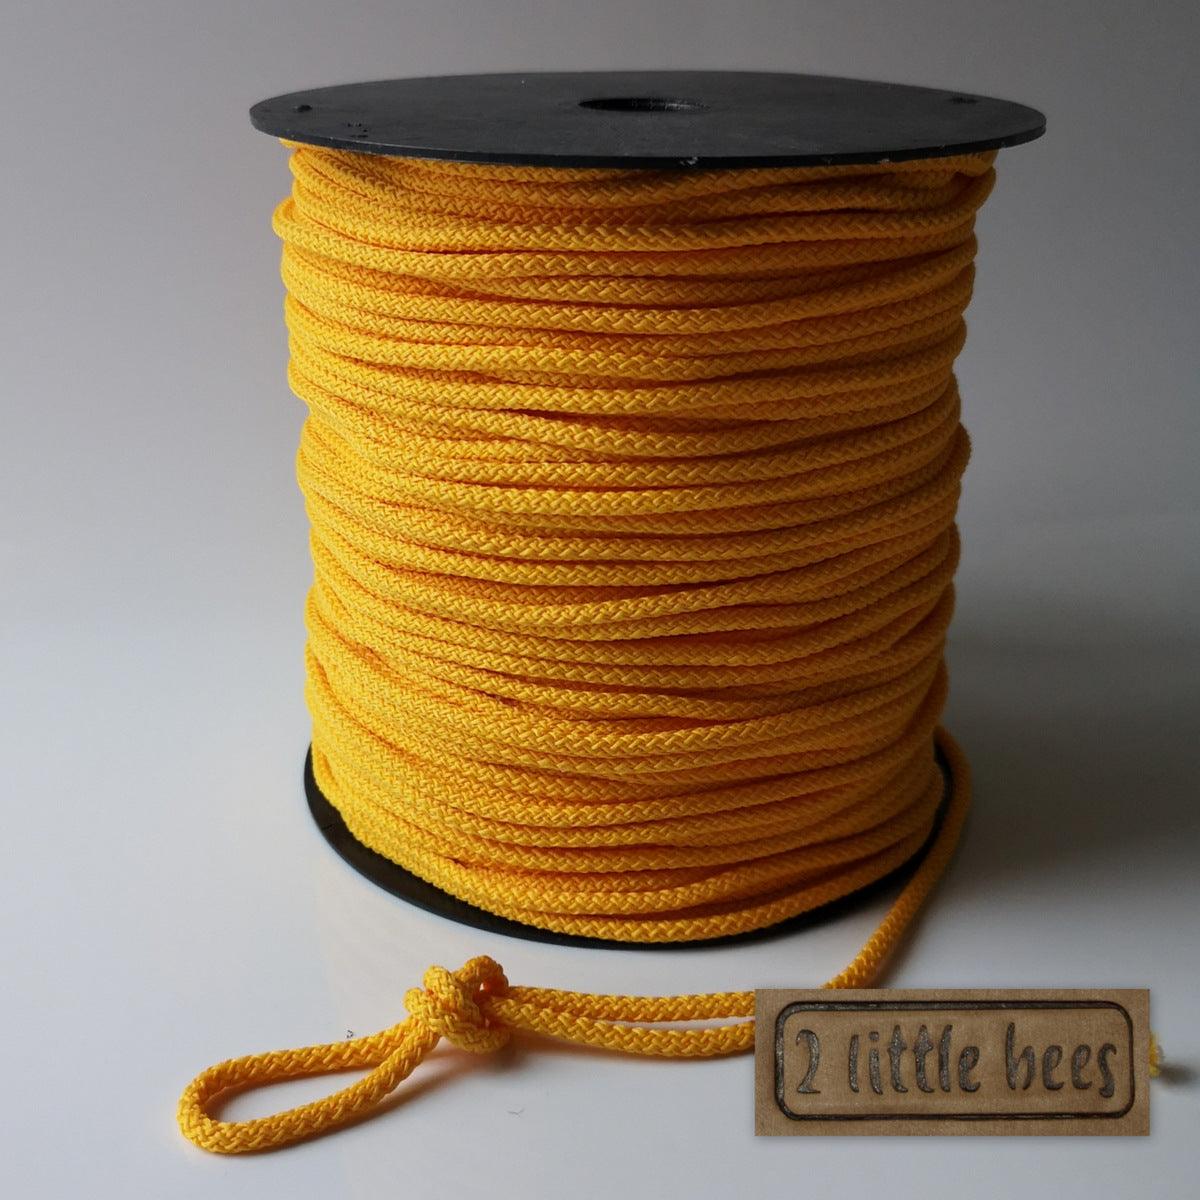 5mm Yellow Strong Rope – 2 little bees